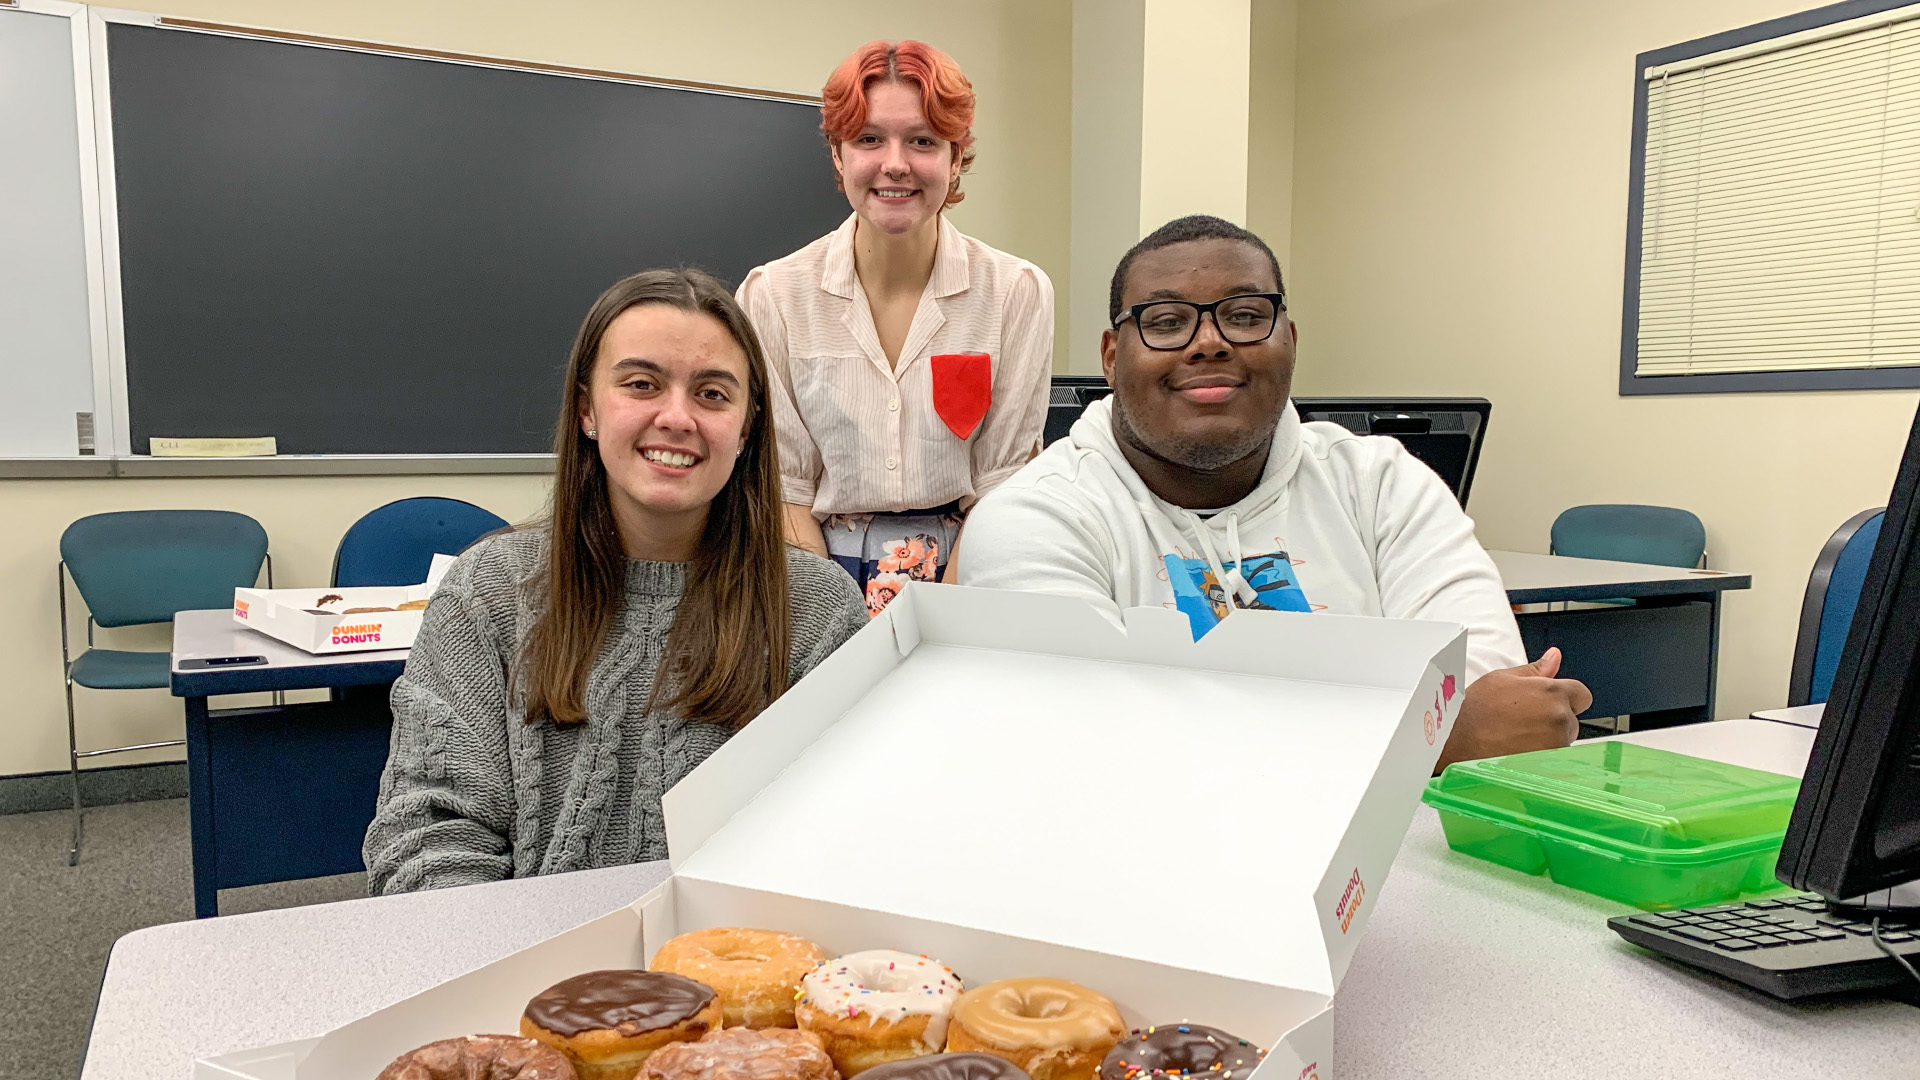 Statistics and Data Science Club members with donuts